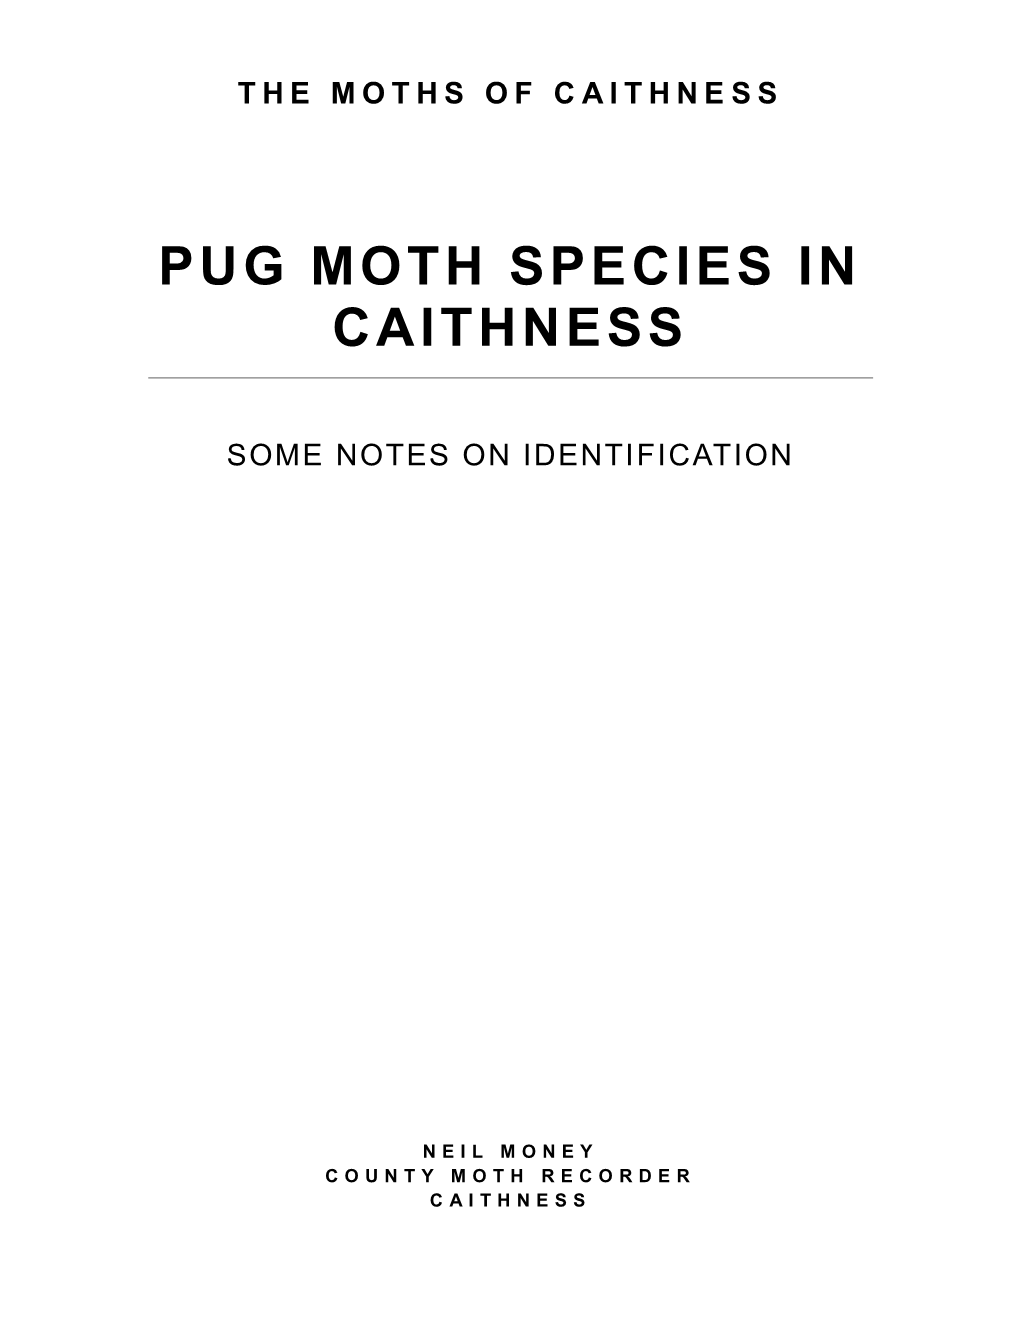 Pug Moth Species in Caithness